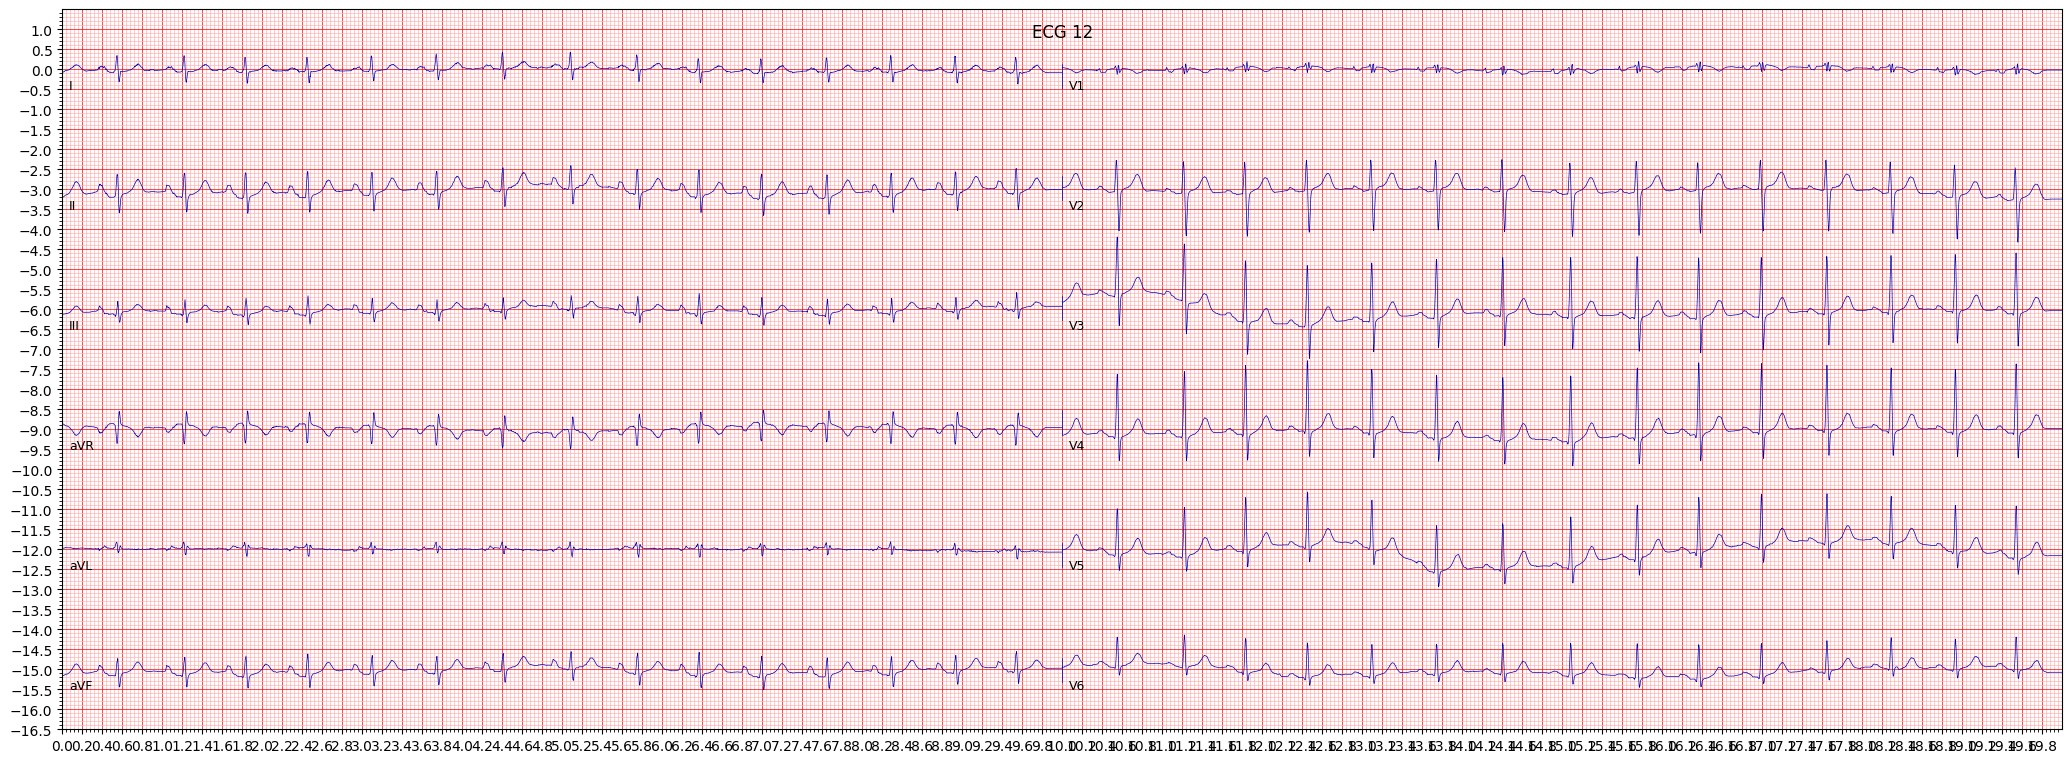 incomplete right bundle branch block (IRBBB) example 938